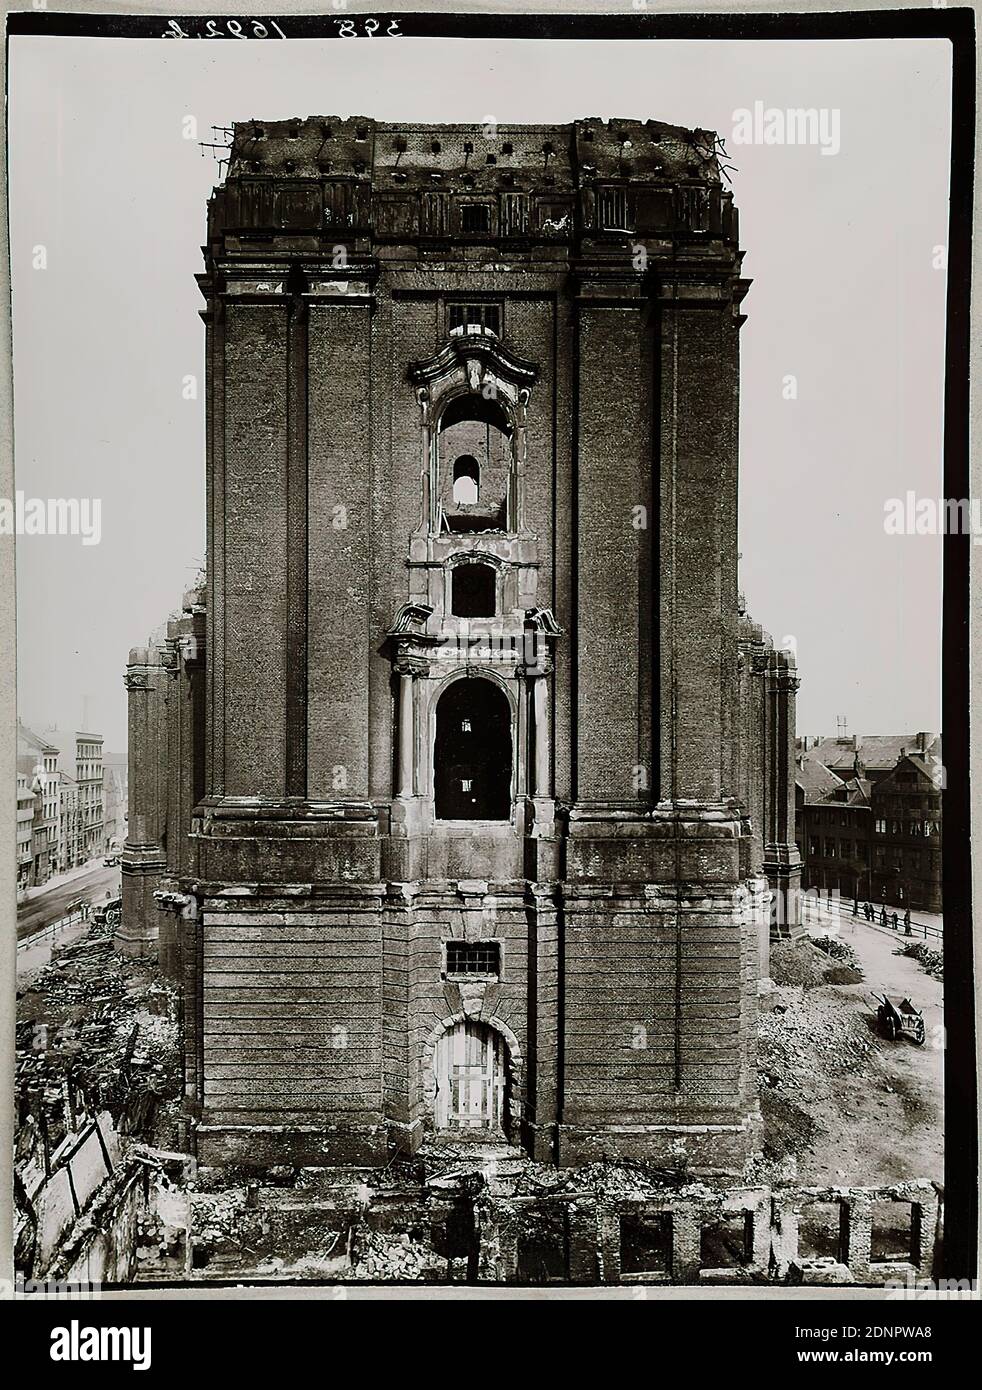 Atelier J. Hamann, Johann Hinrich W. Hamann, Große St. Michaeliskirche, fire ruin 1906, tower facade, total, silver gelatine paper, black and white positive process, total: height: 23.80 cm; width: 18.00 cm, label: verso: in typewriter typography: D A 401, Große St. Michaeliskirche, fire ruin 1906, tower facade, total, address stamp of the Staatliche Landesbildstelle Hamburg with copyright notice, label: verso: handwritten in lead: Hamann, D A 401, reporting photography, architectural photography, ruin church, monastery, hist. Building, locality, street, exterior of a church Stock Photo